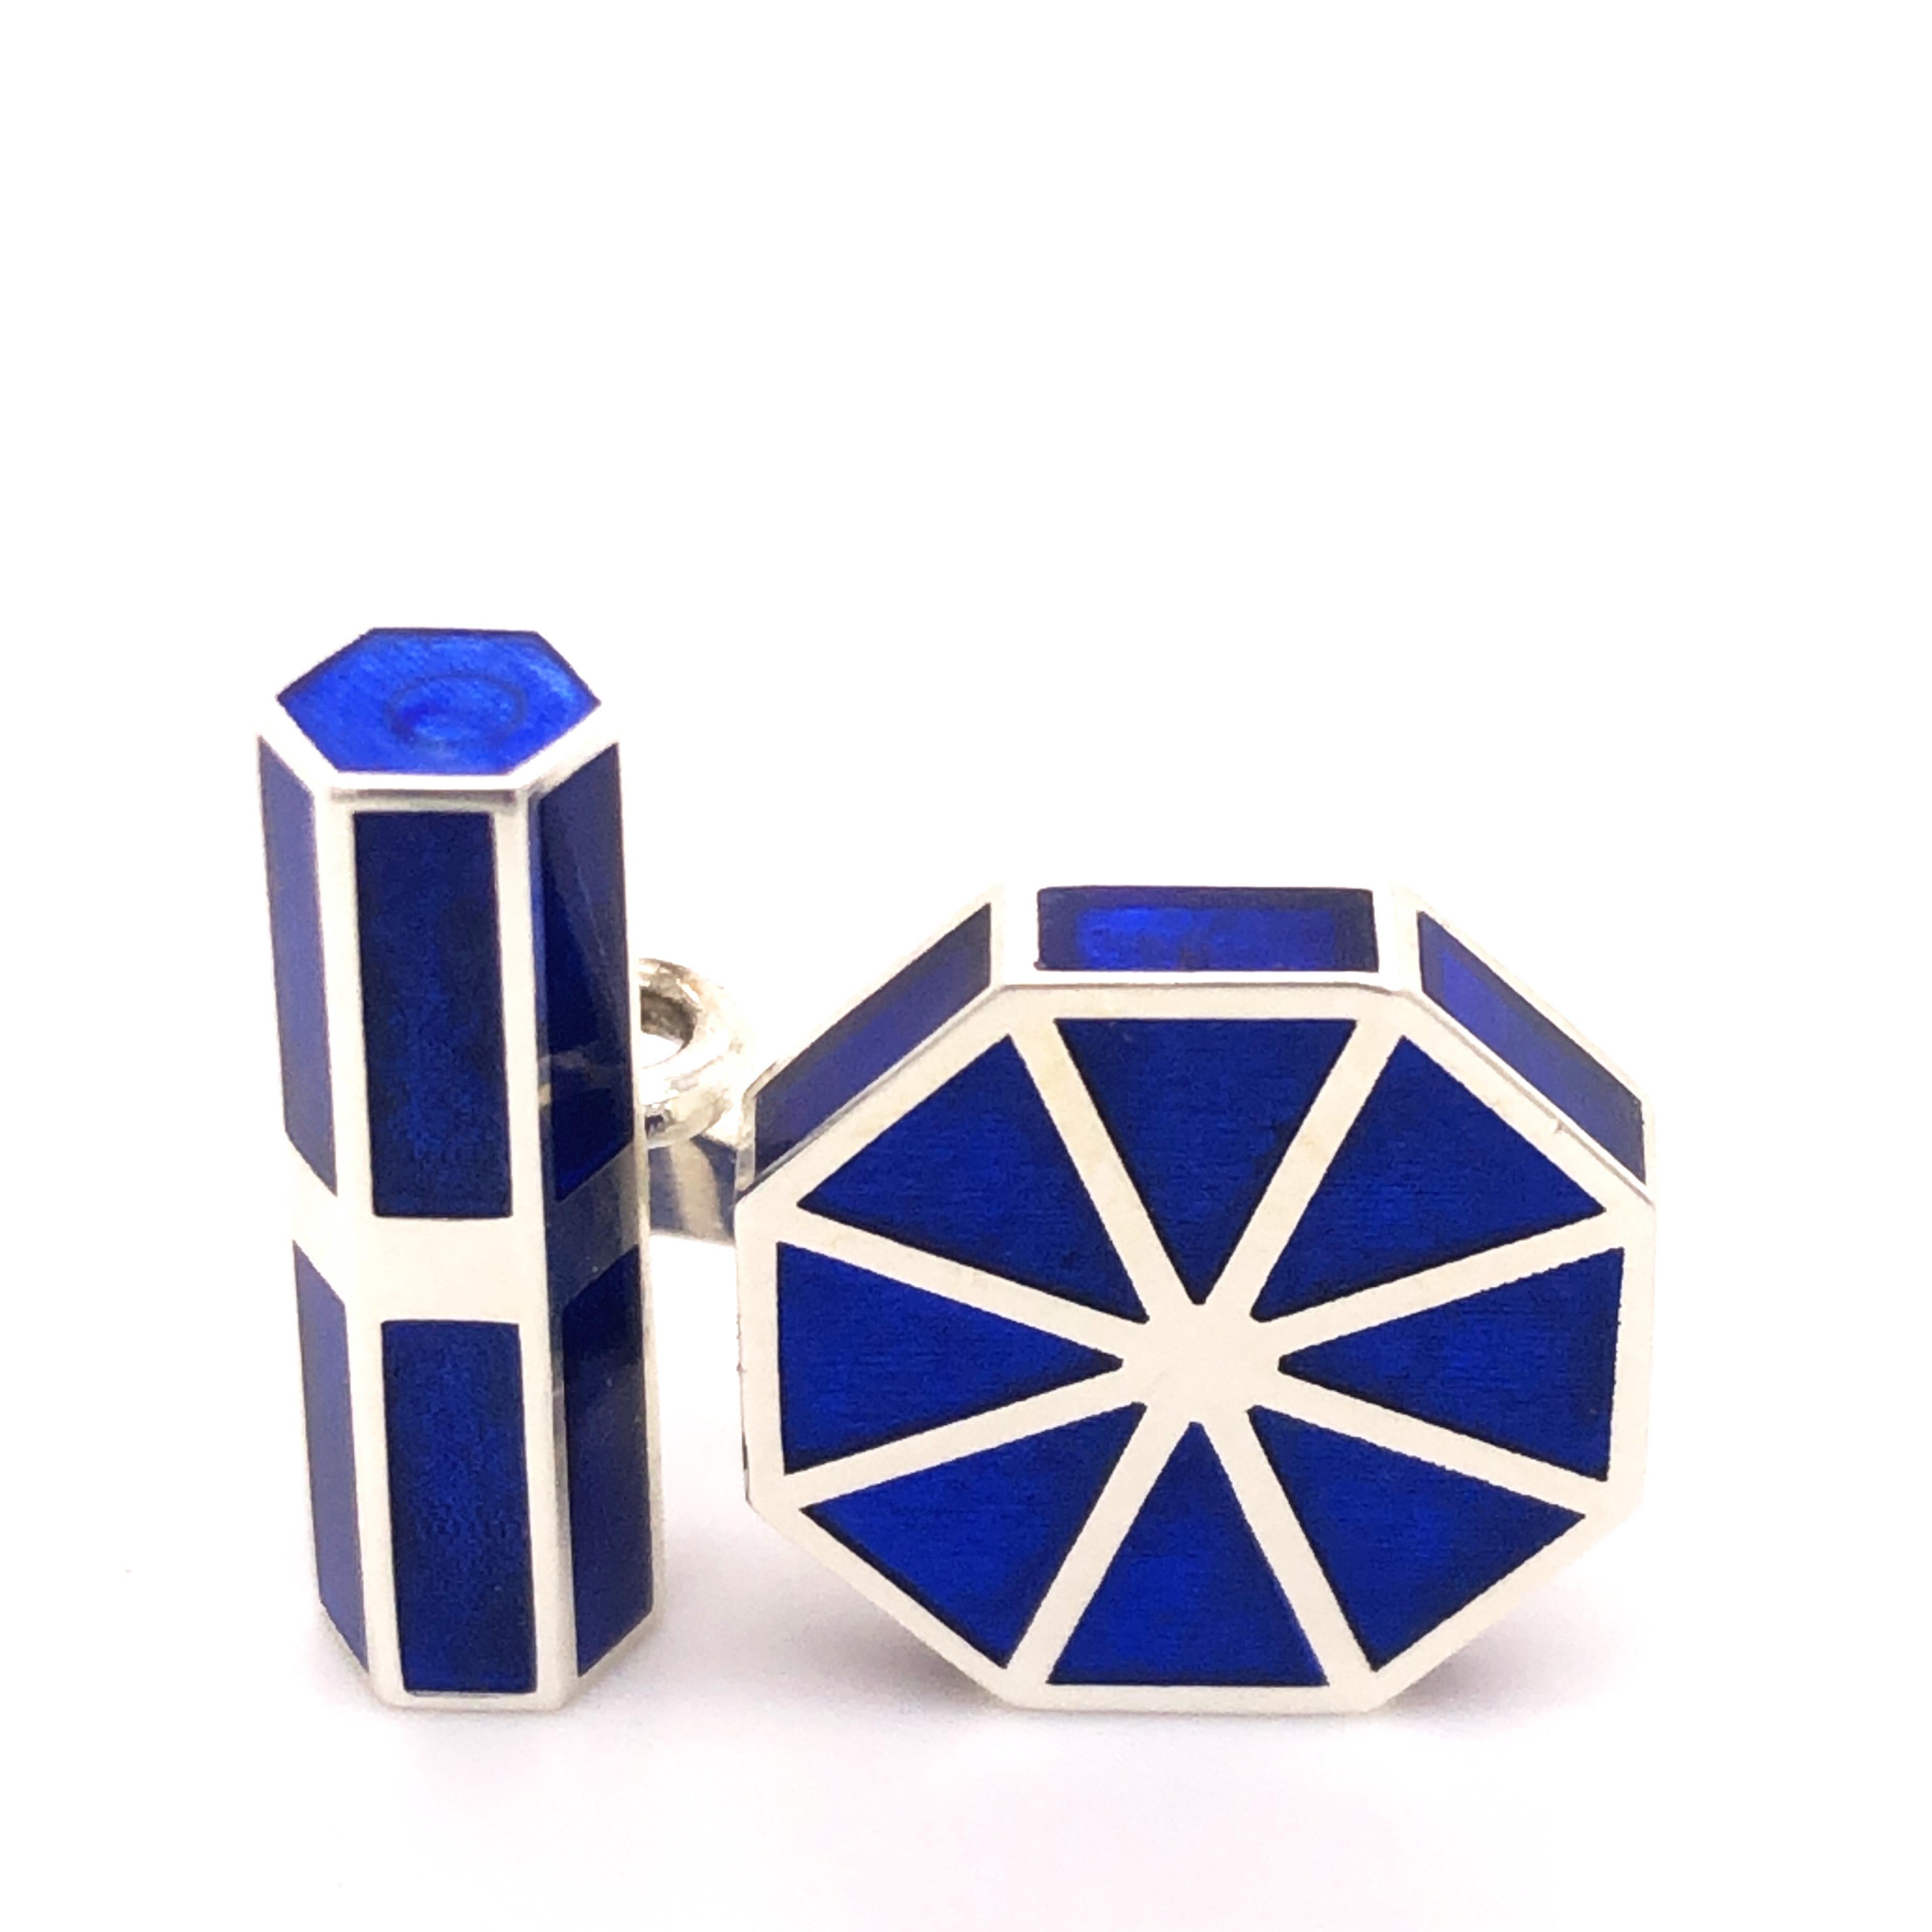 Unique, Chic yet Timeless Royal Blue  Hand Enameled, Handcrafted Octagonal Sterling Silver Cufflinks.
In our Smart Black Box and Pouch.